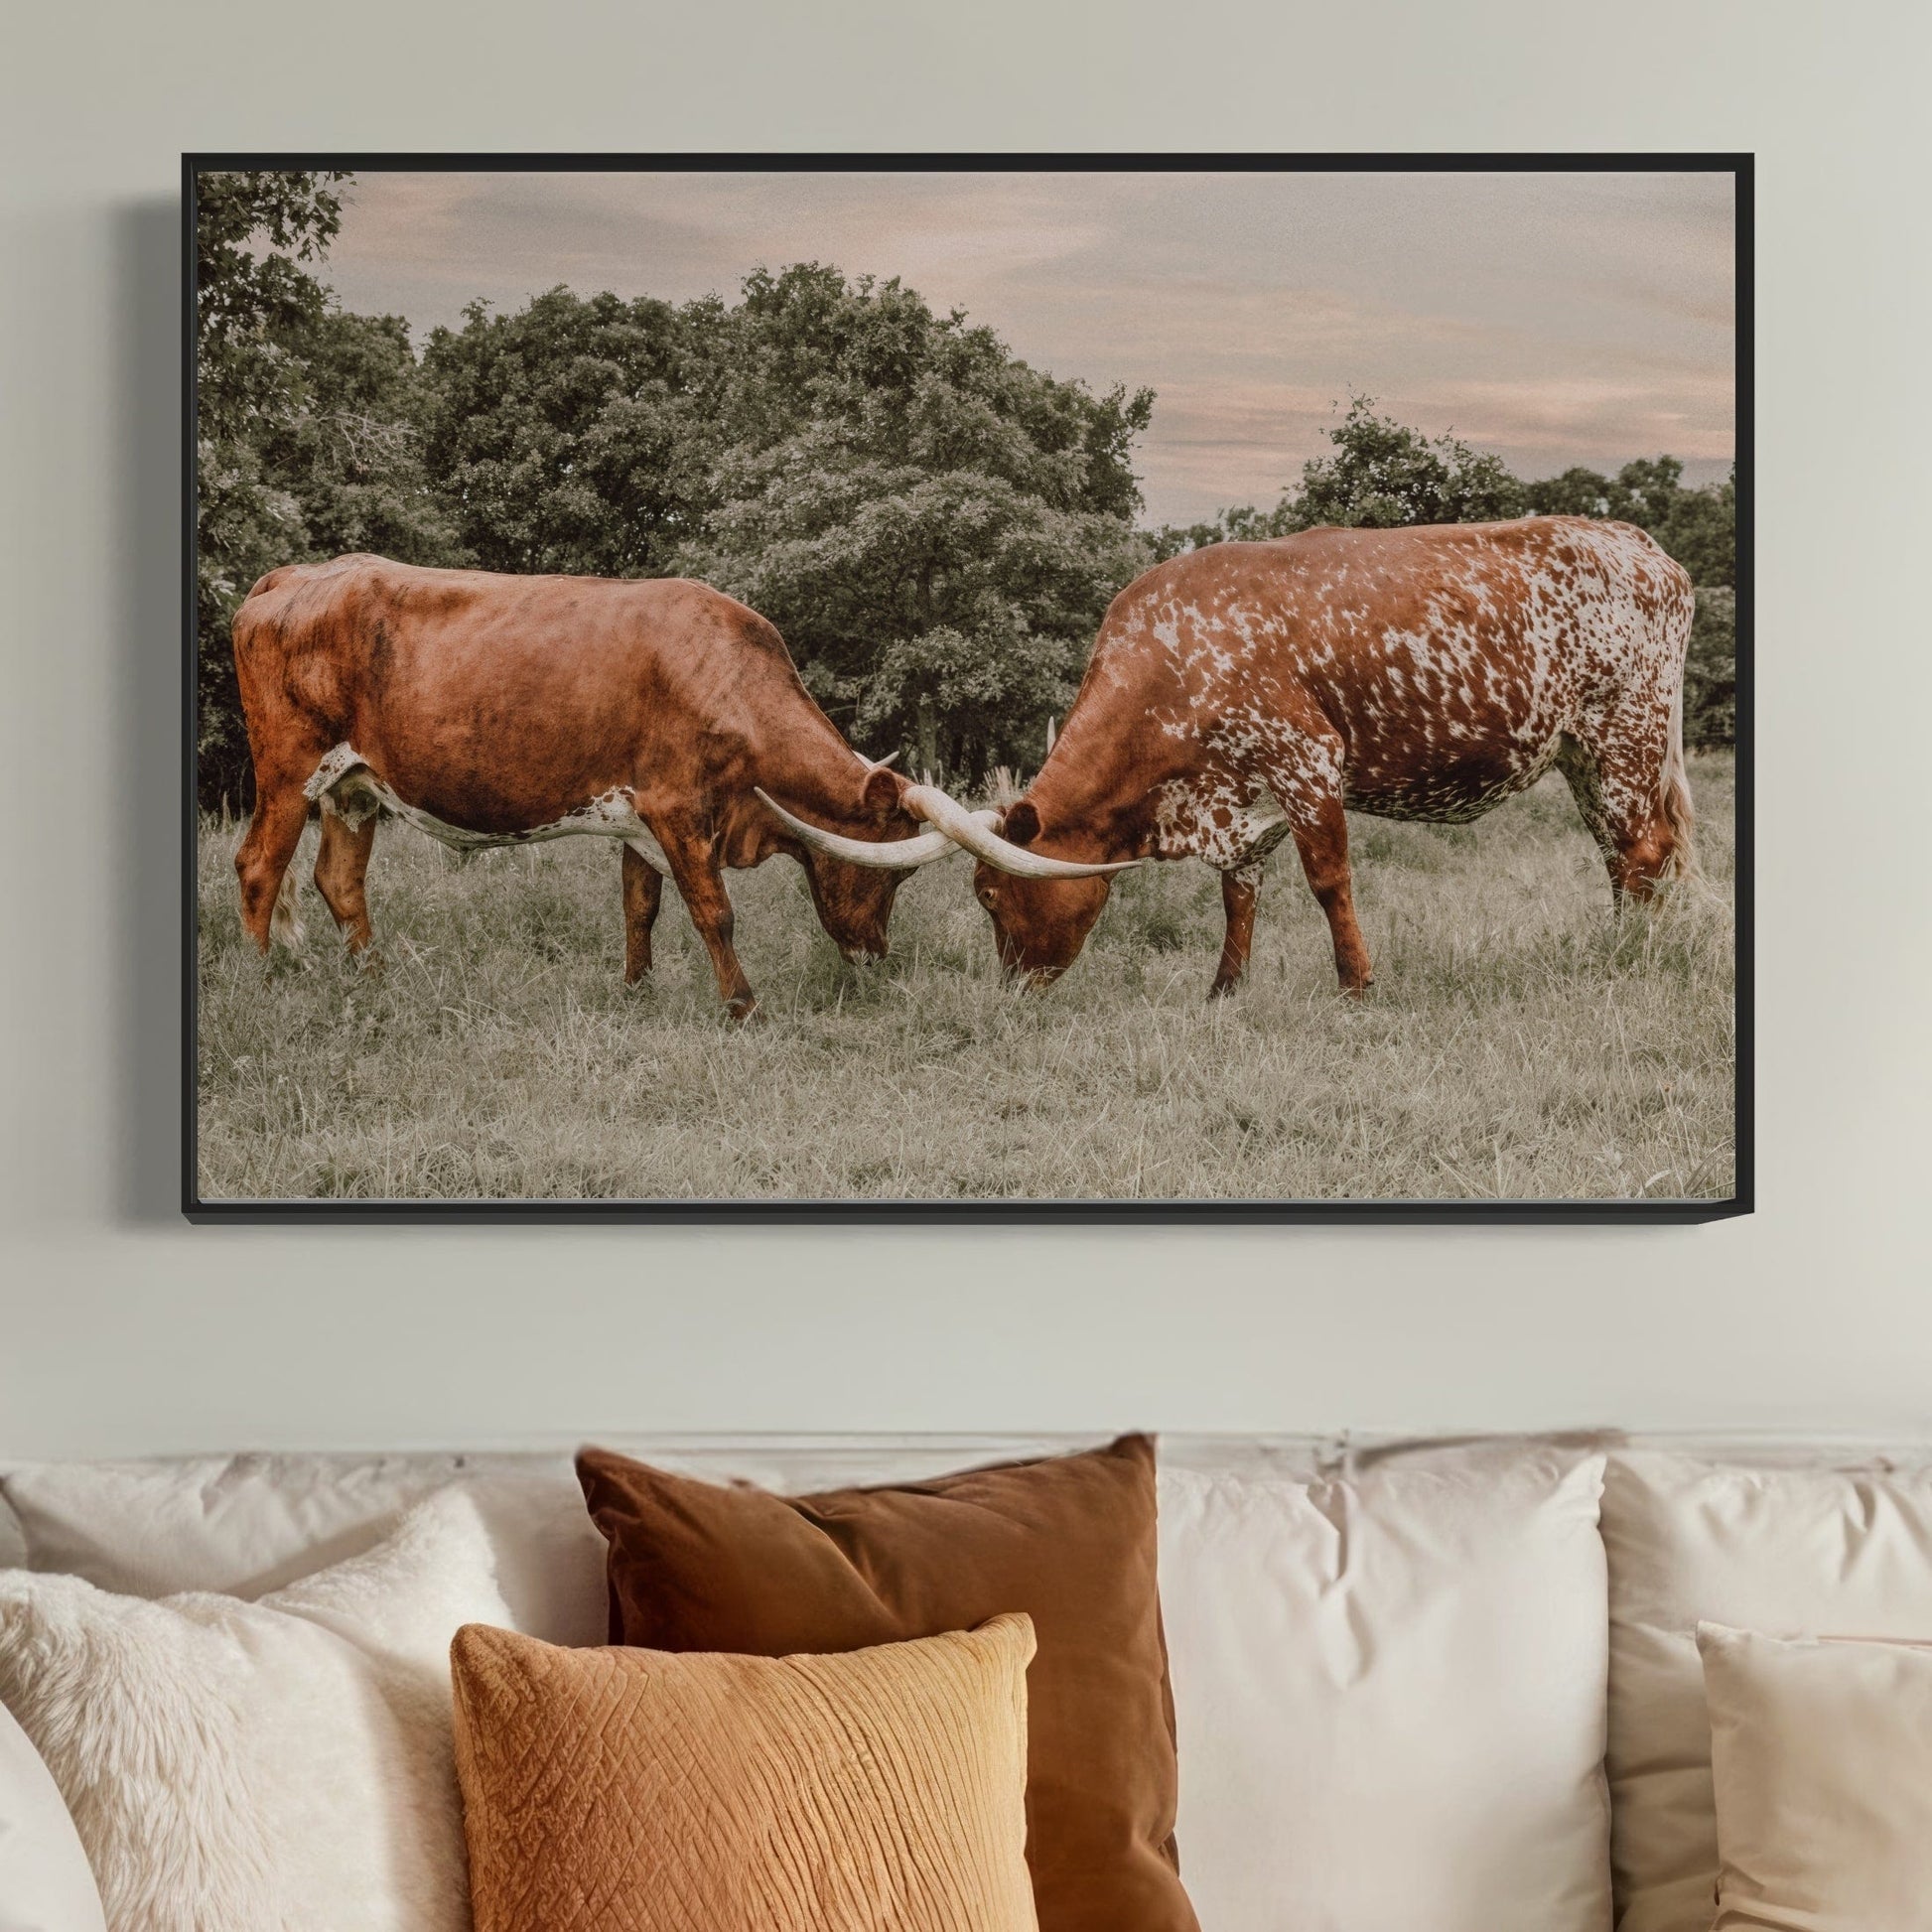 Texas Longhorn Cattle Wall Art in Muted Colors Wall Art Teri James Photography